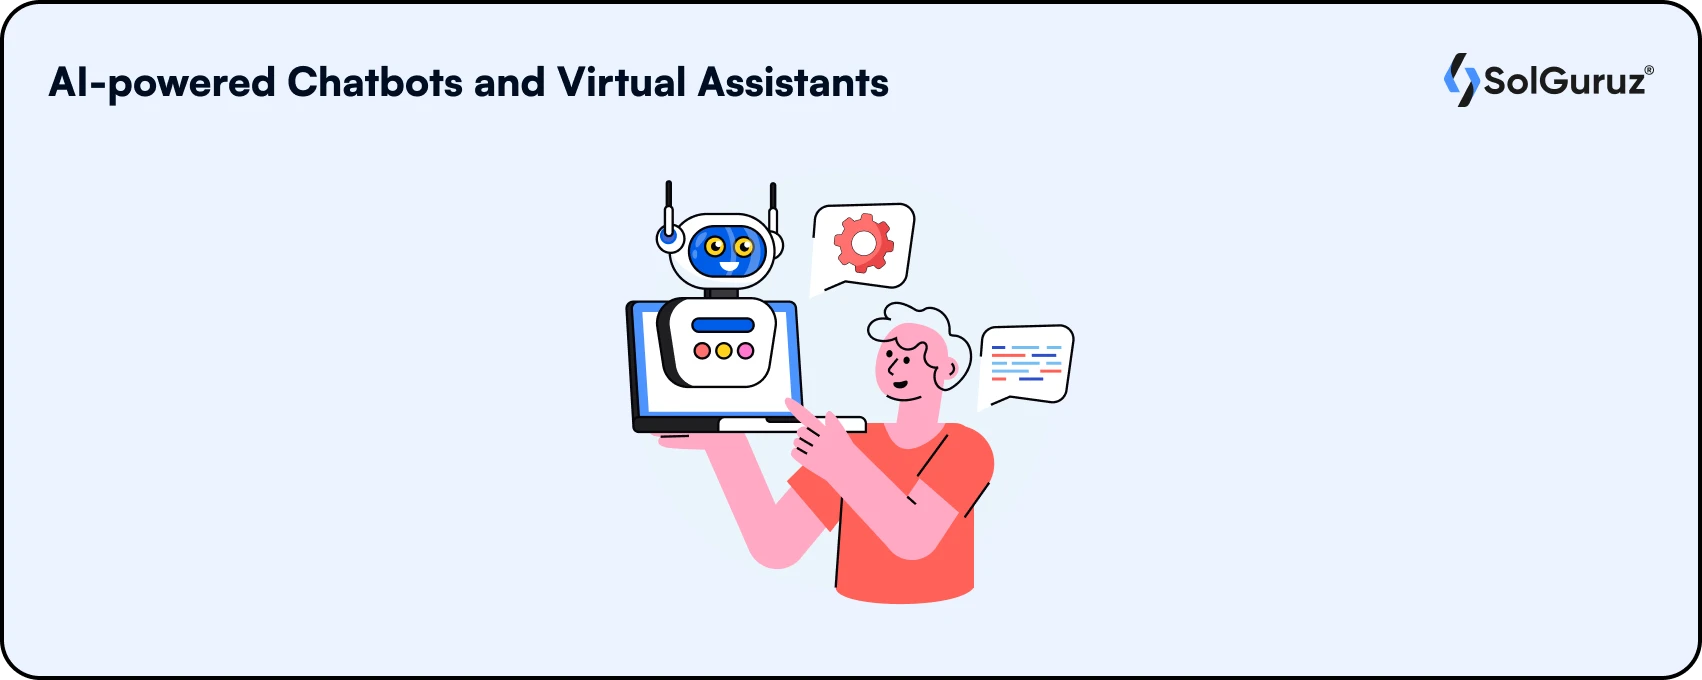 AI-powered Chatbots and Virtual Assistants